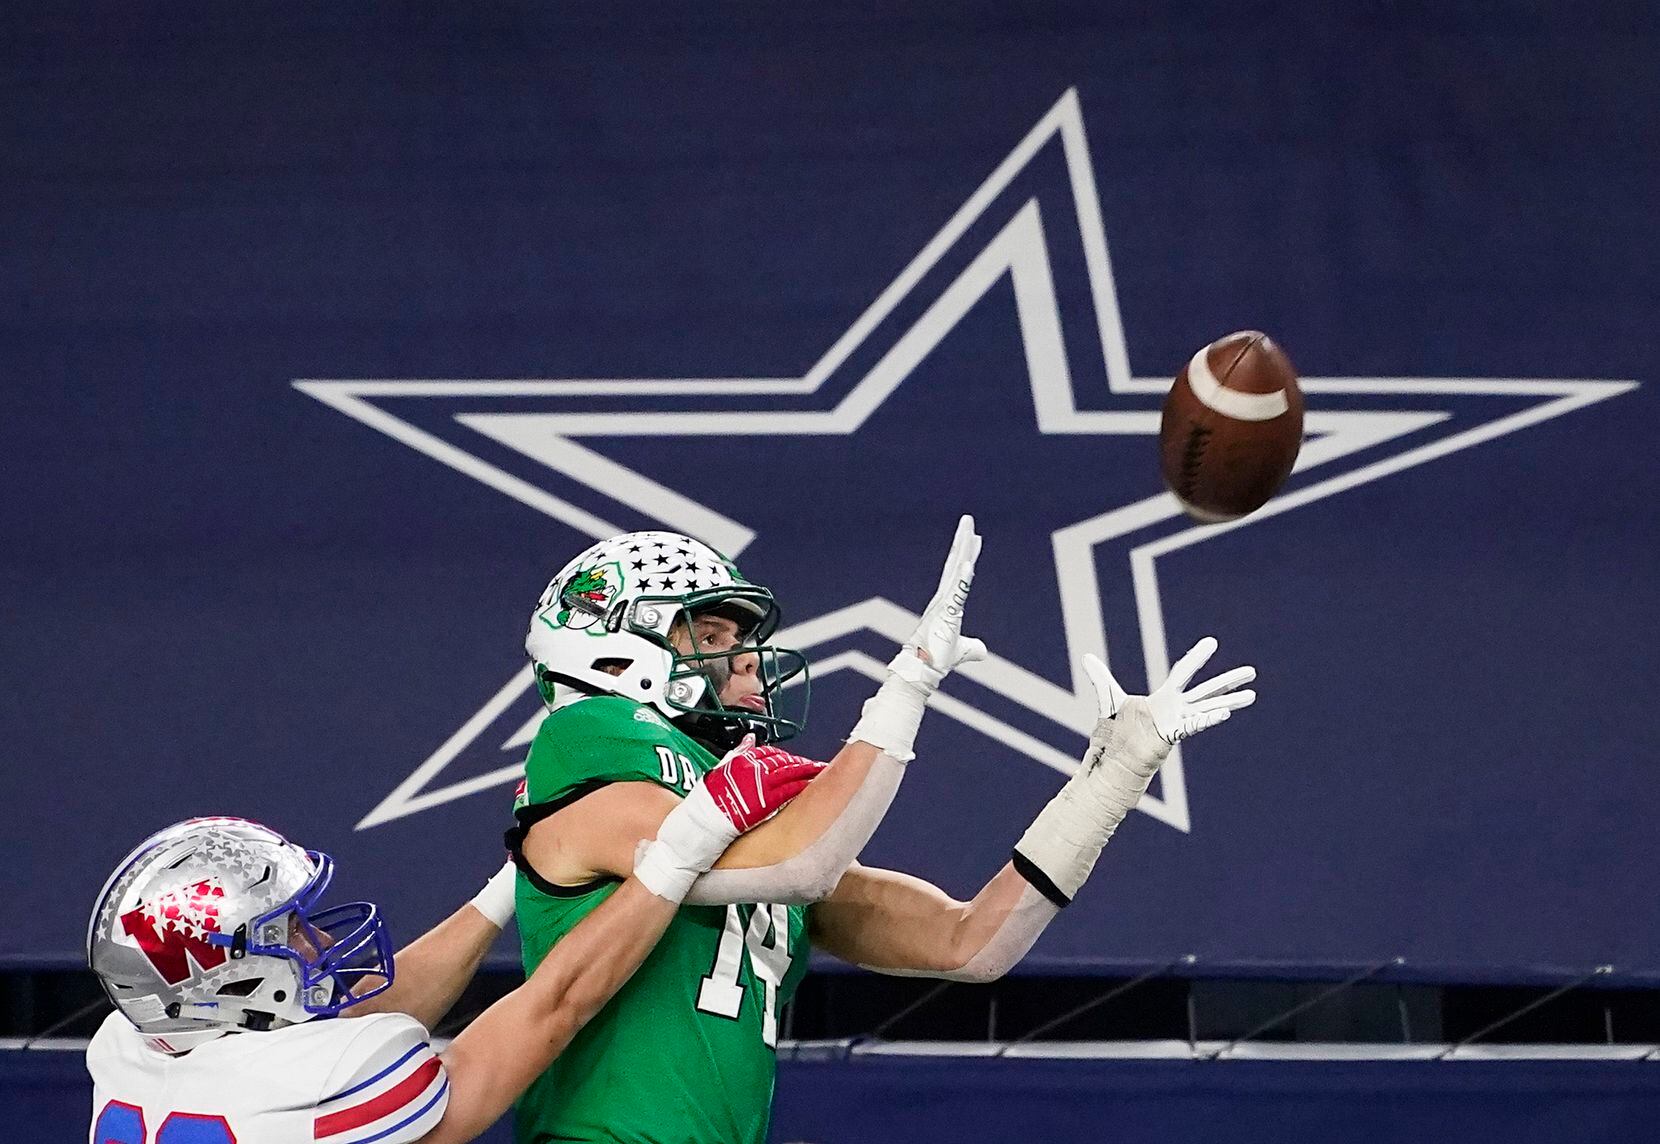 Austin Westlake defensive back Beau Breathard (23) breaks up a pass intended for Southlake Carroll wide receiver Brady Boyd (14) during the fourth quarter of the Class 6A Division I state football championship game at AT&T Stadium on Saturday, Jan. 16, 2021, in Arlington, Texas. Westlake won the game 52-34.